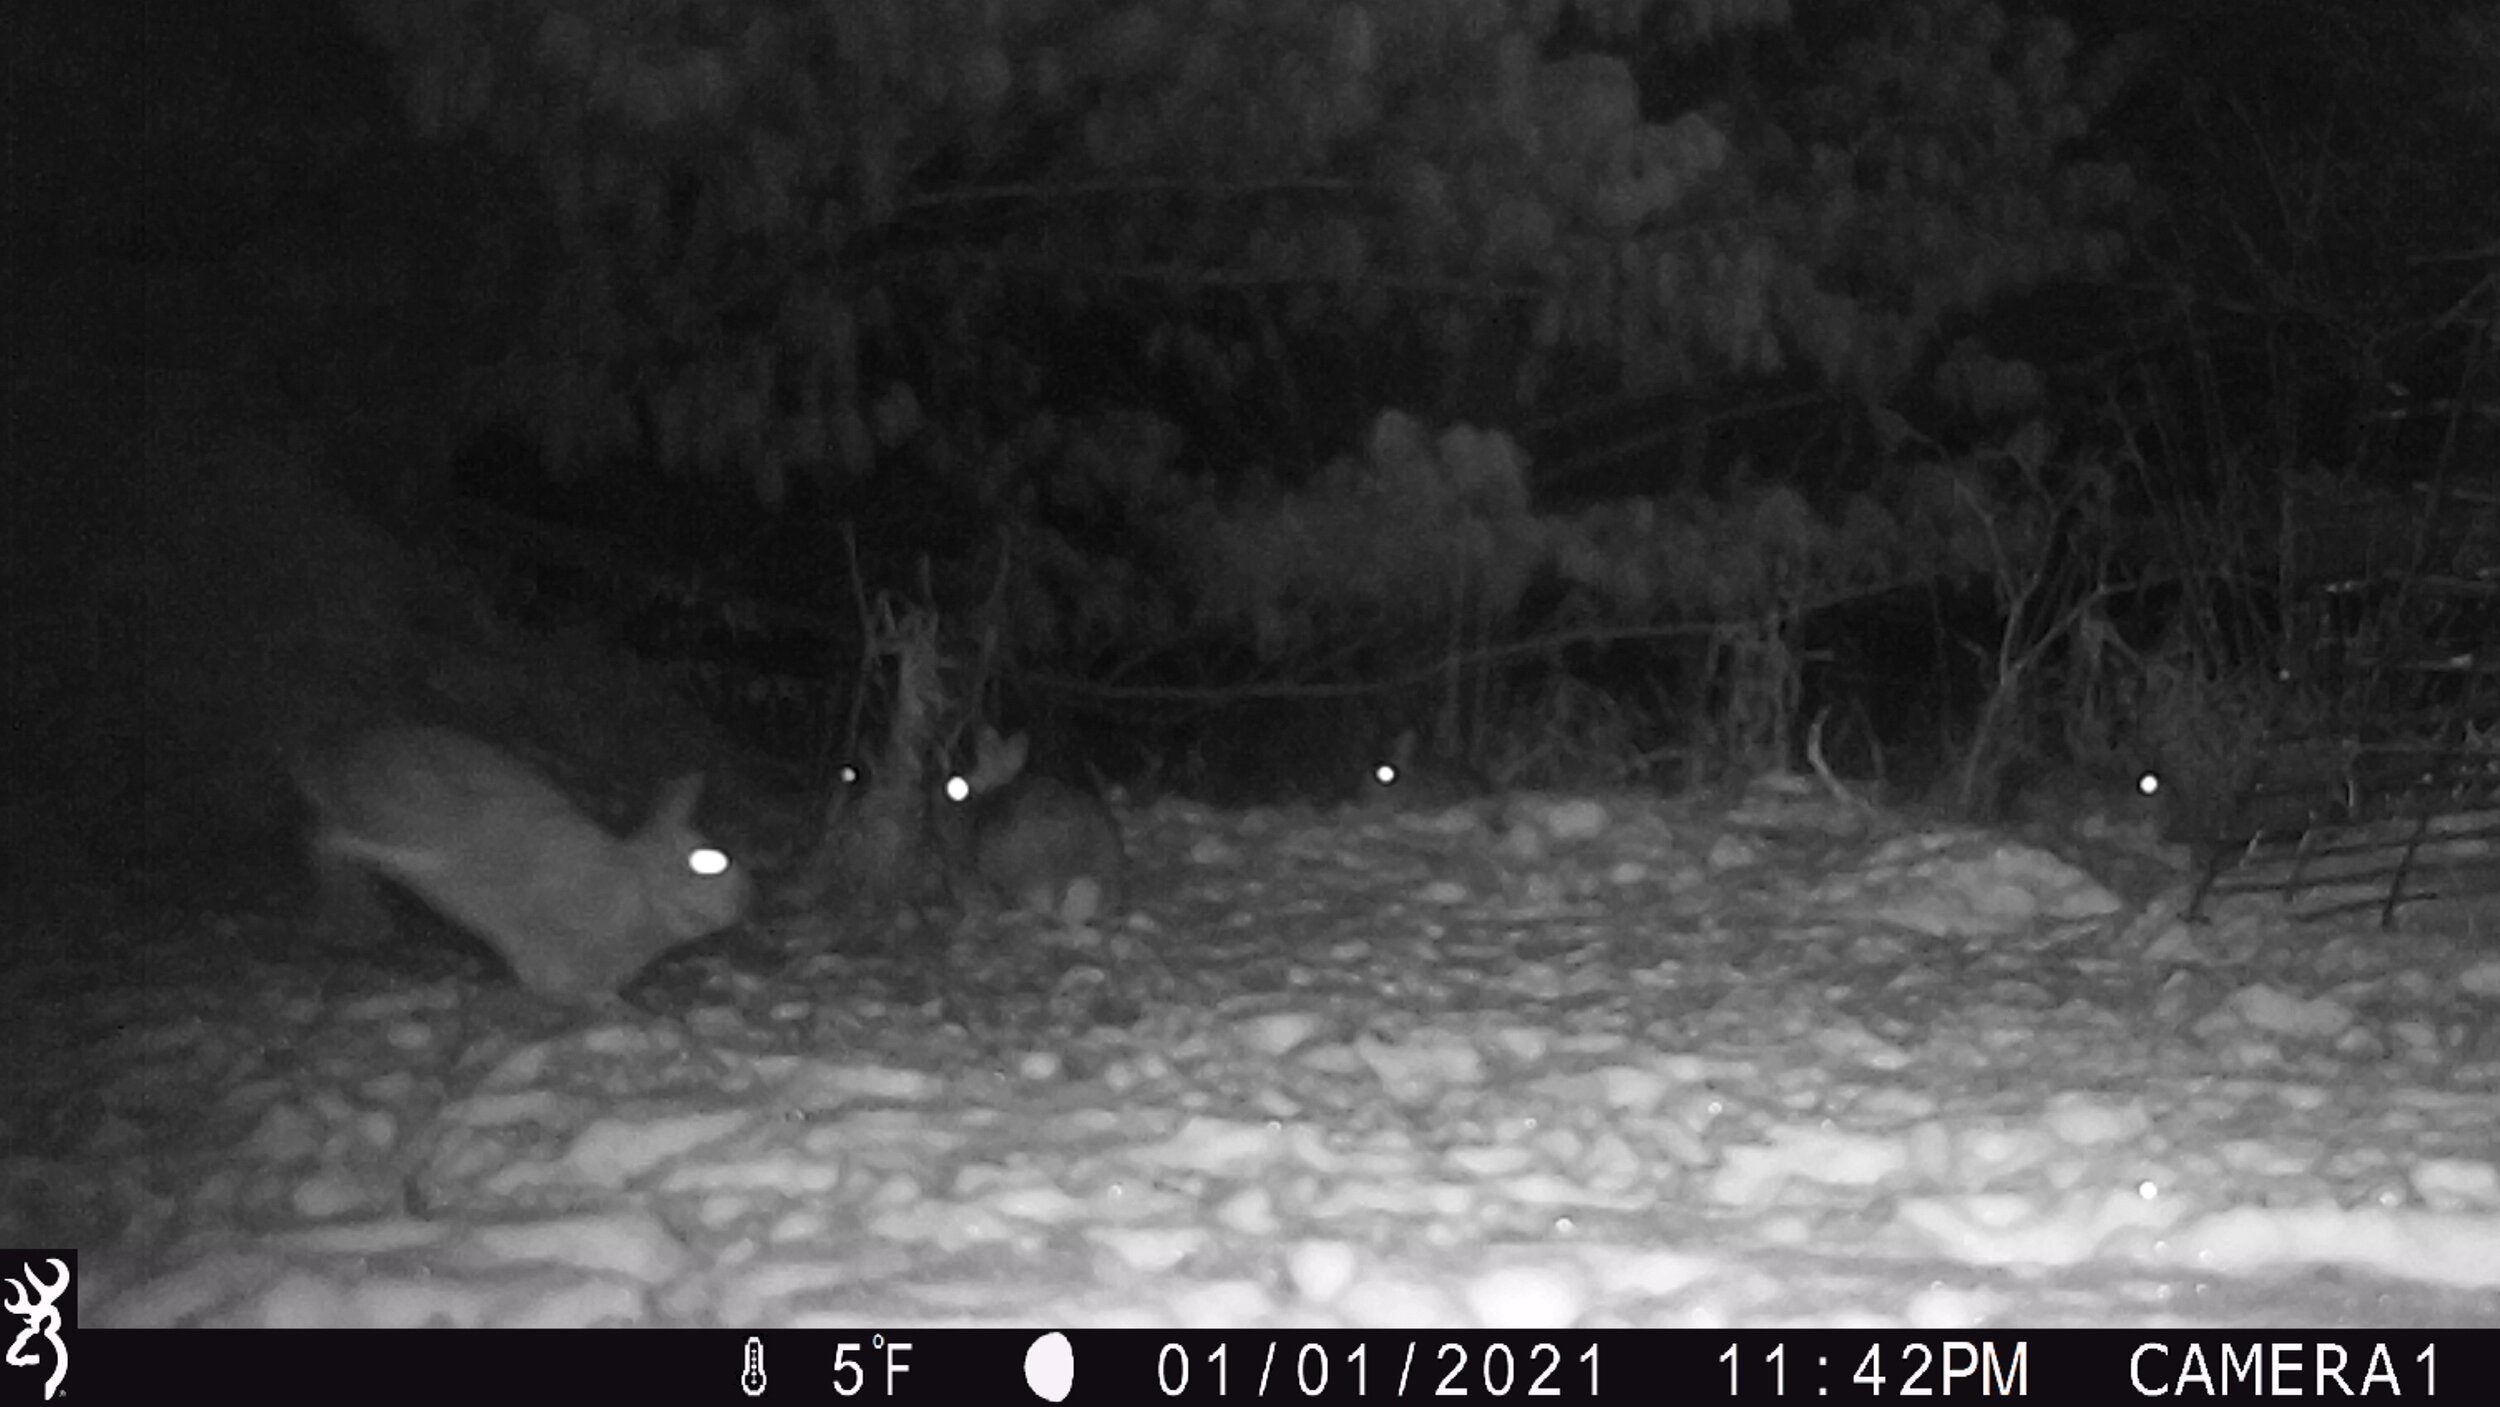 Rabbits! Over 1,400 photos in 14 hours! They were active all night long despite the cold!